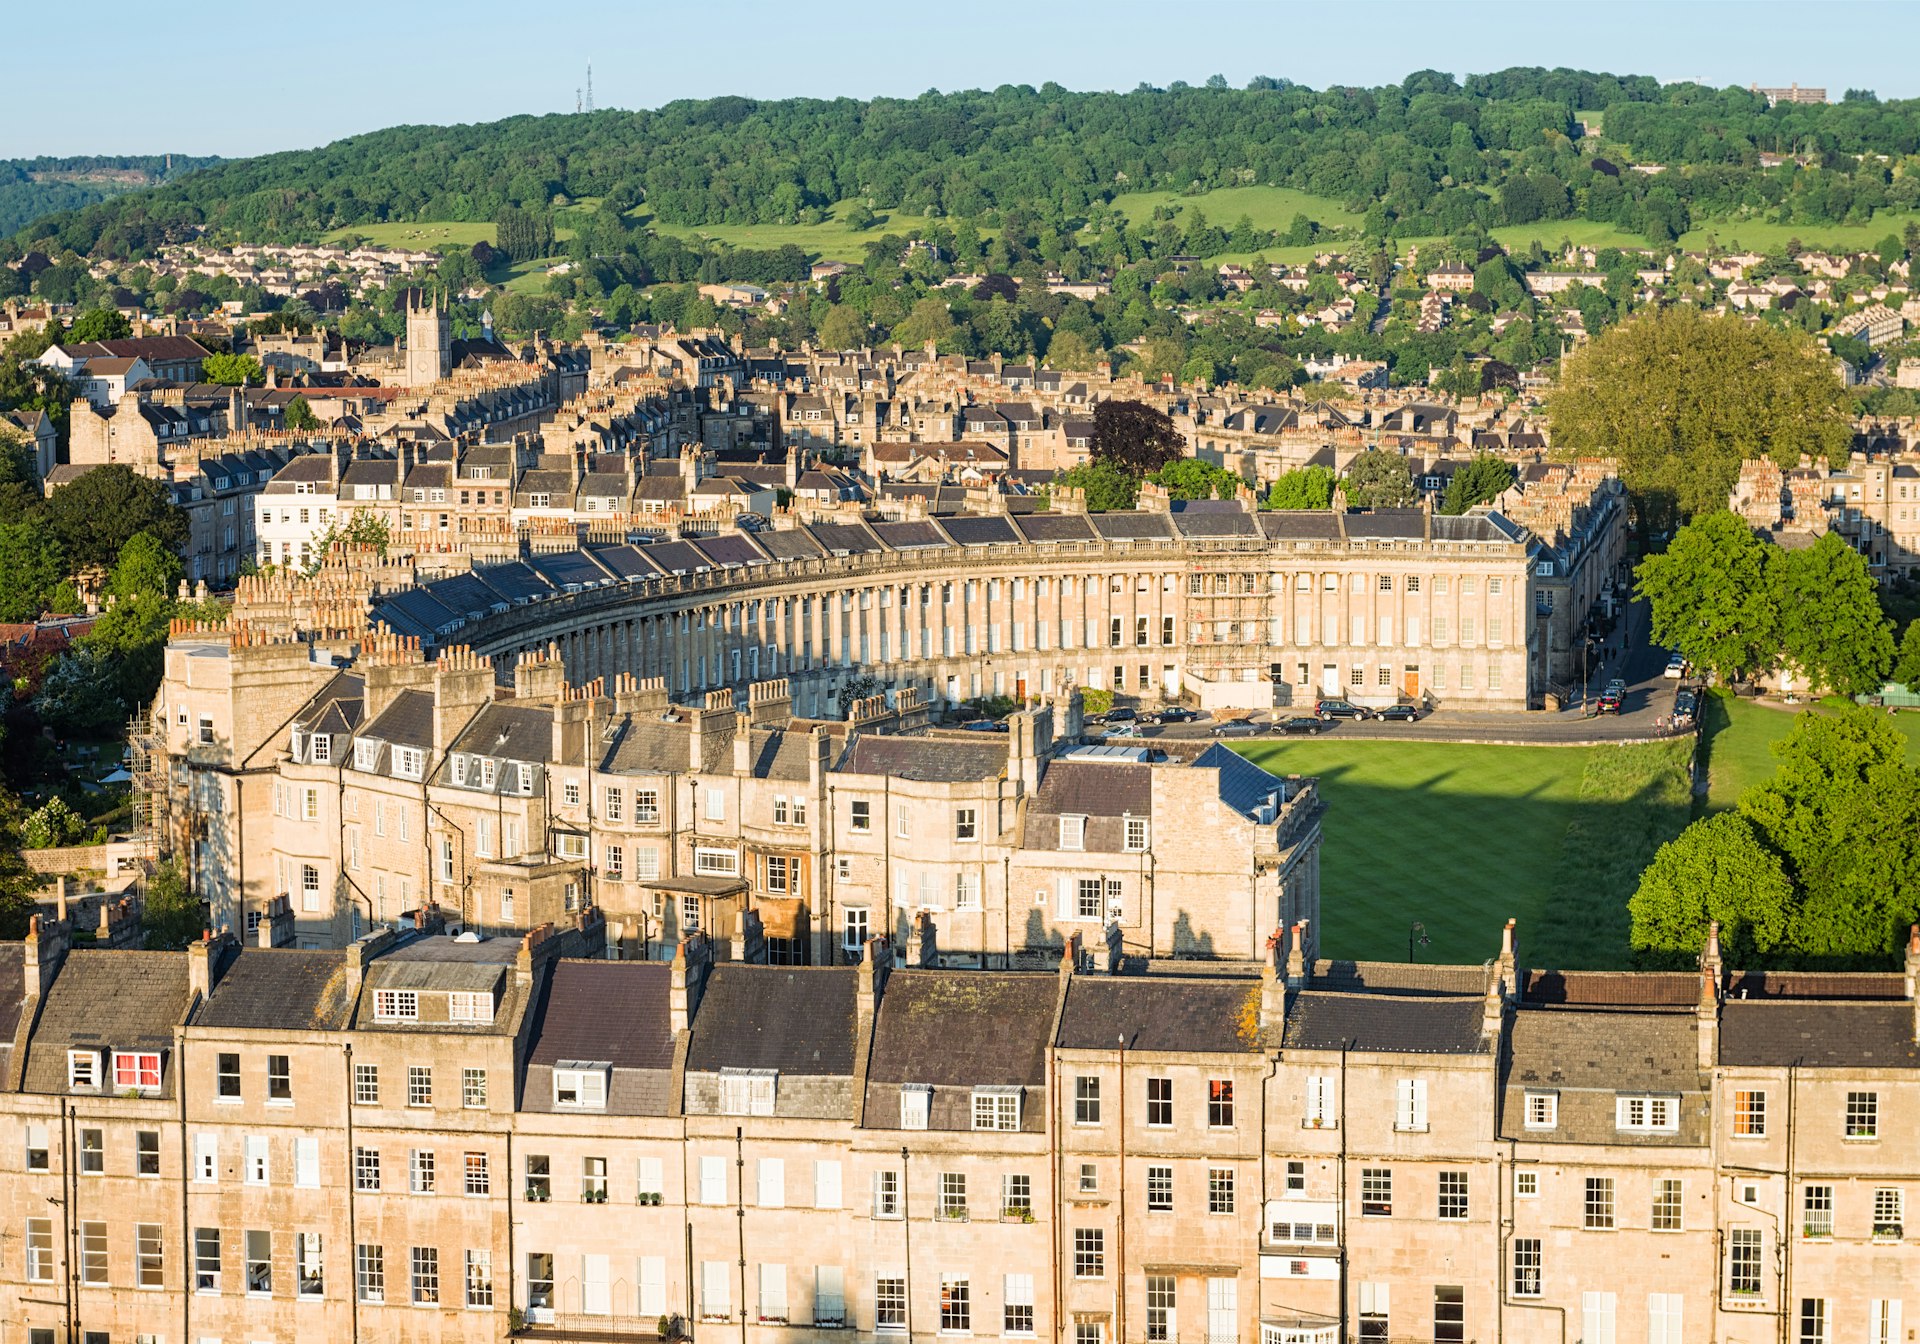 An aerial view of Royal Crescent in Bath, England